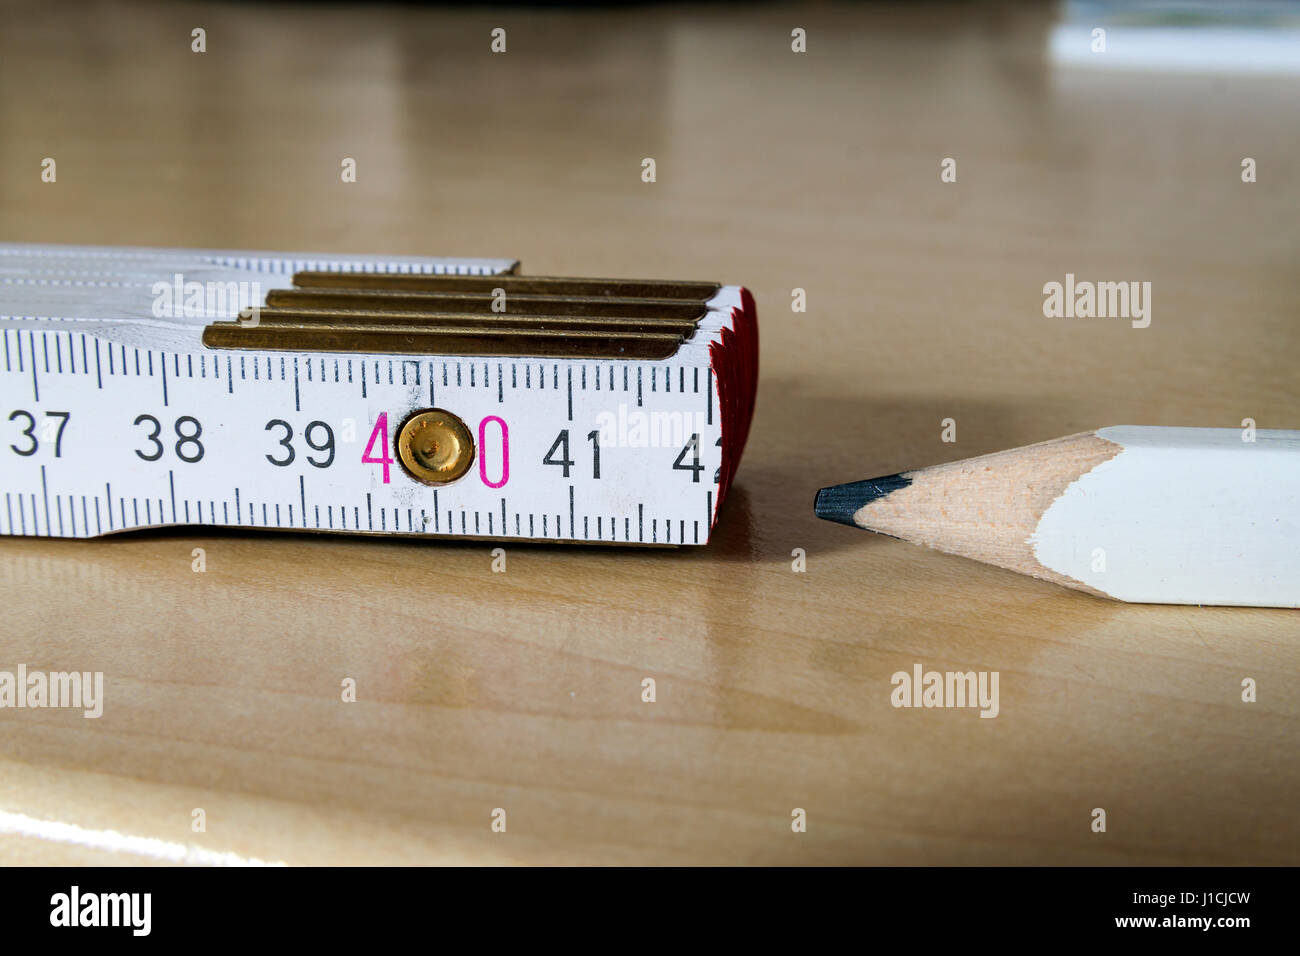 Measuring tape meter and pensil. Construction tools. Stock Photo